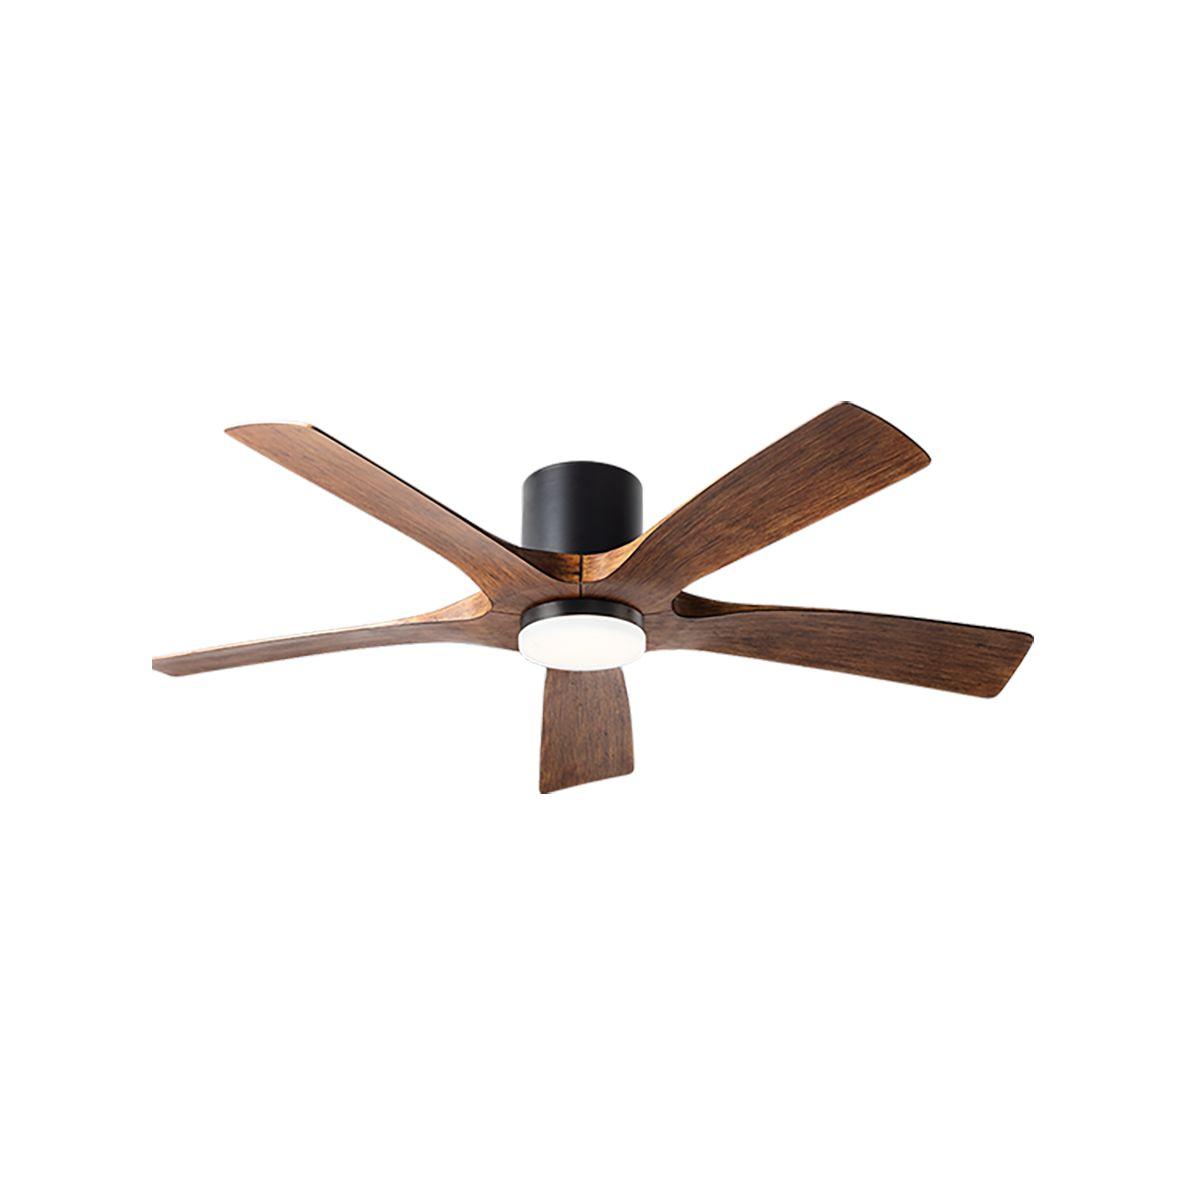 Aviator 5 Blades Flush Mount 54 Inch Outdoor Smart Ceiling Fan With Wall Control